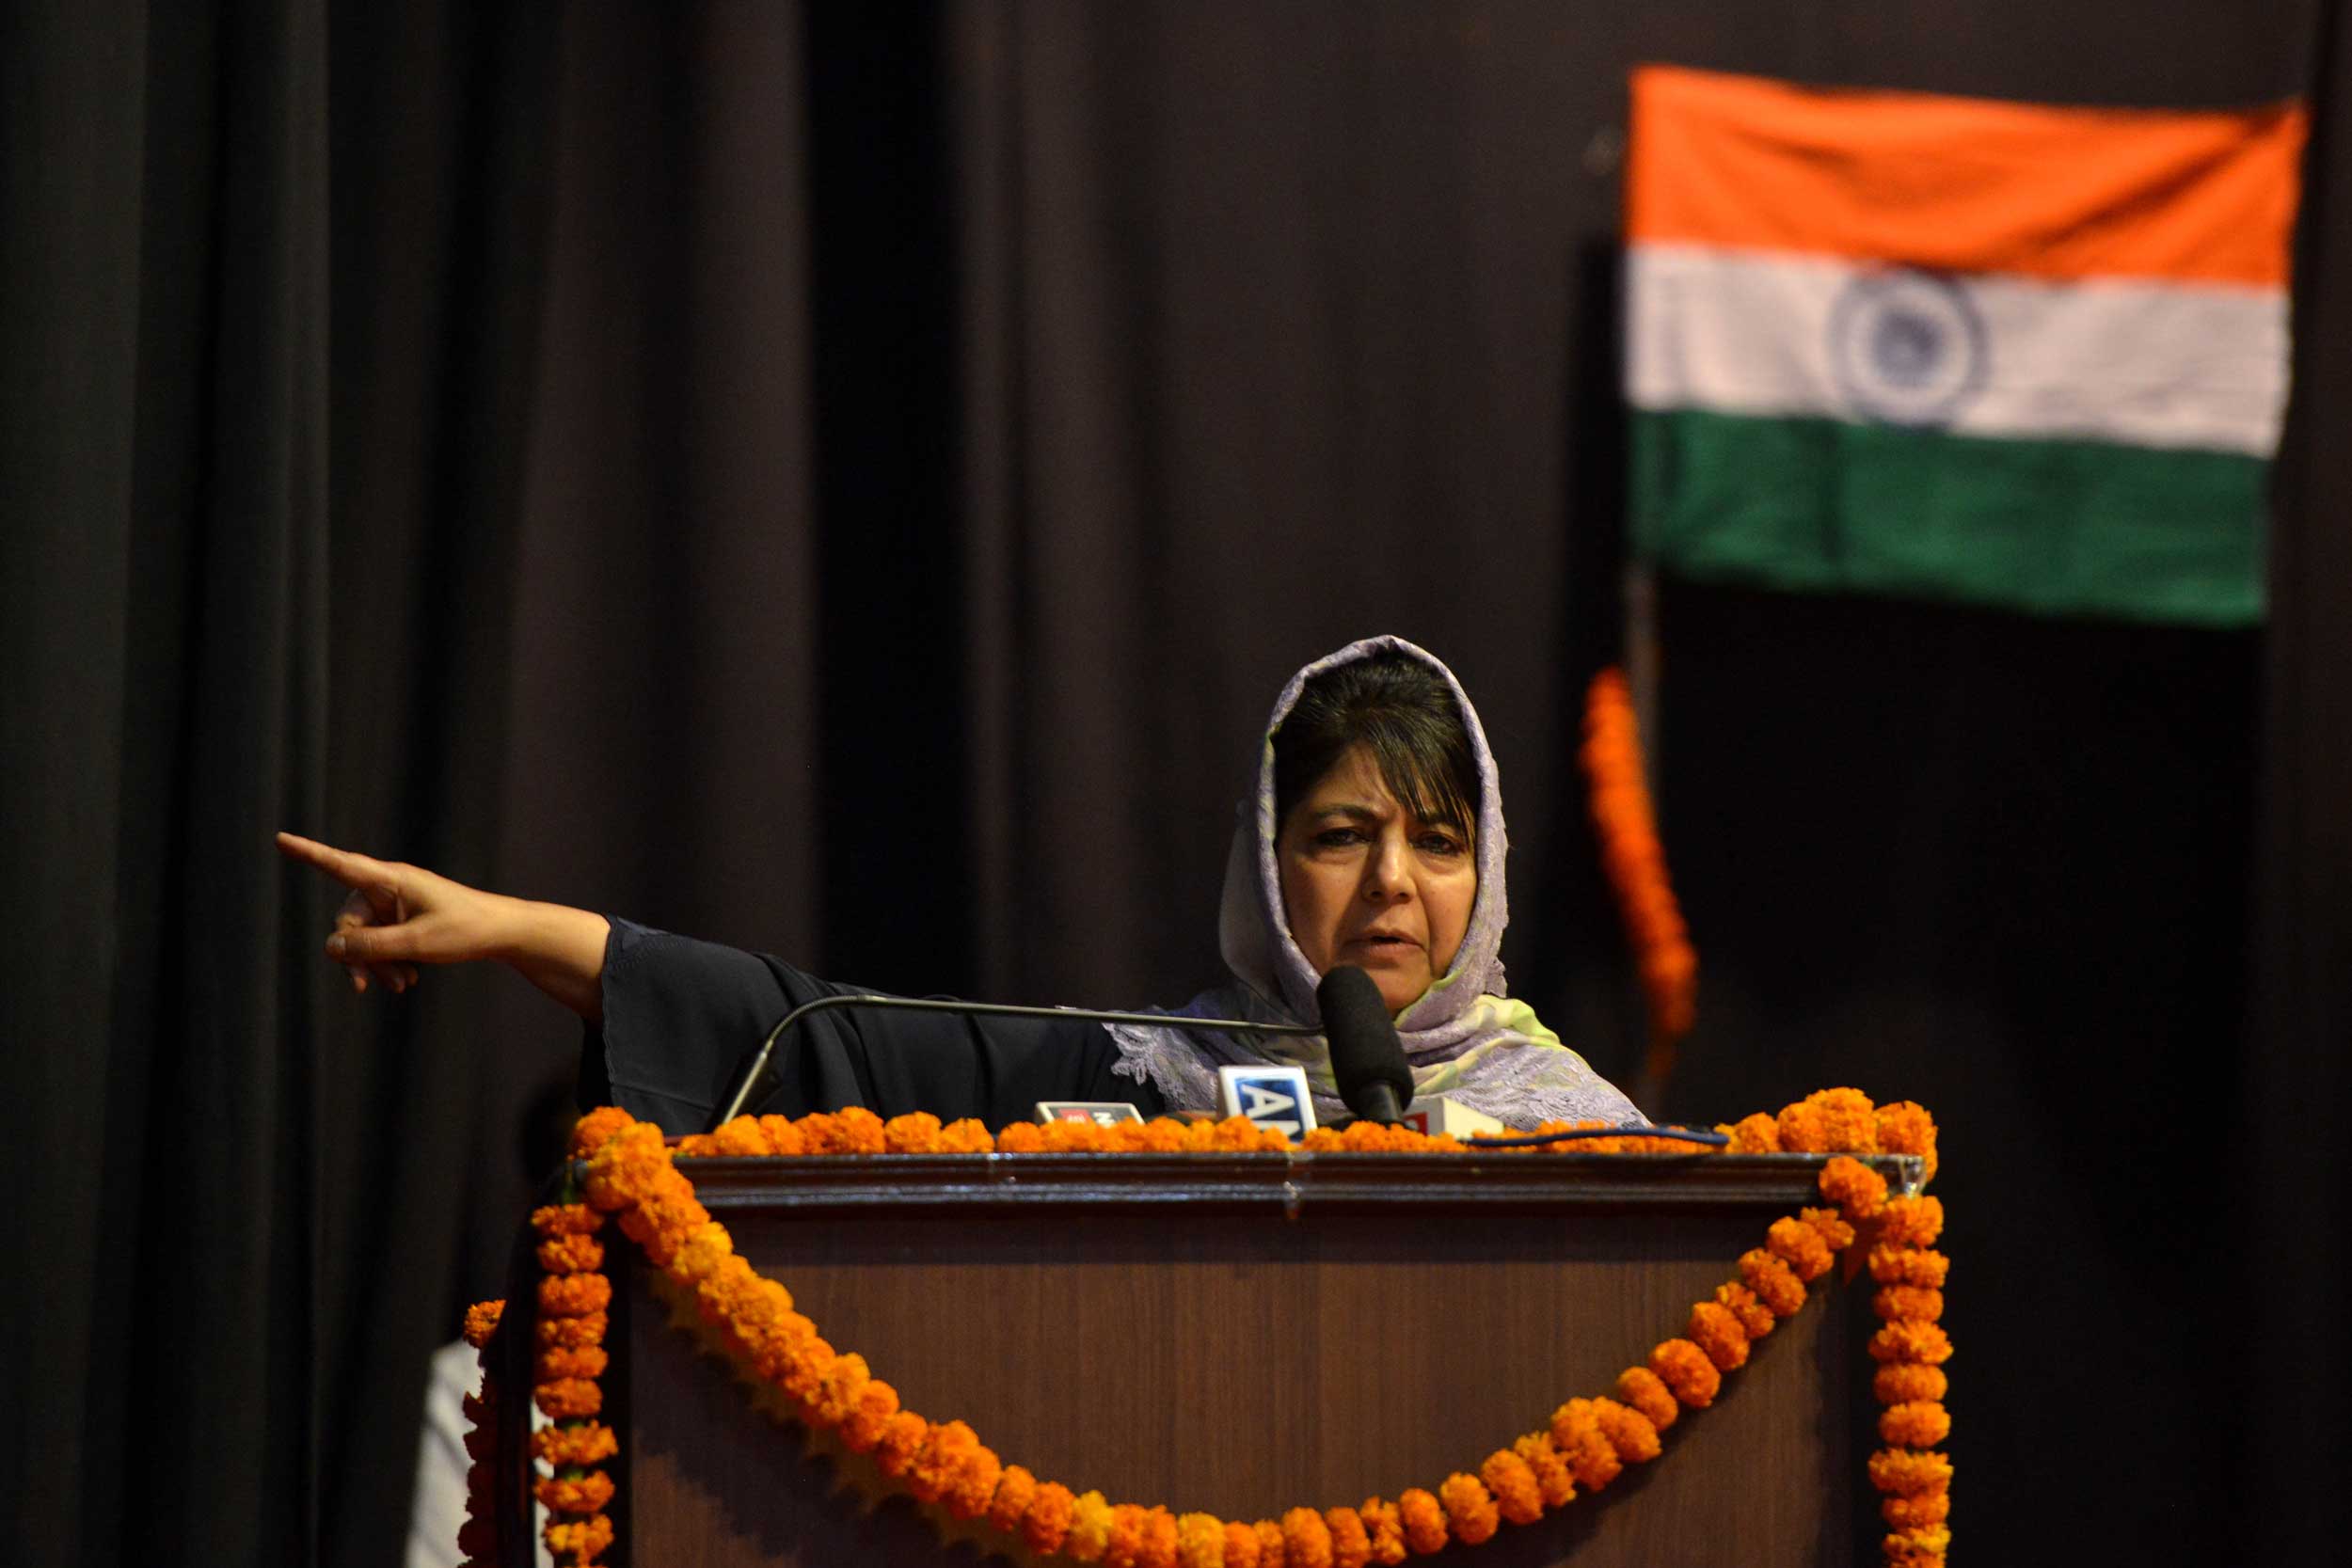 Mehbooba Mufti (in picture) said the Jamaat was an “ideology” that couldn’t be “caged” and sounded a warning about the ban’s possible “dangerous consequences”, without elaborating.

